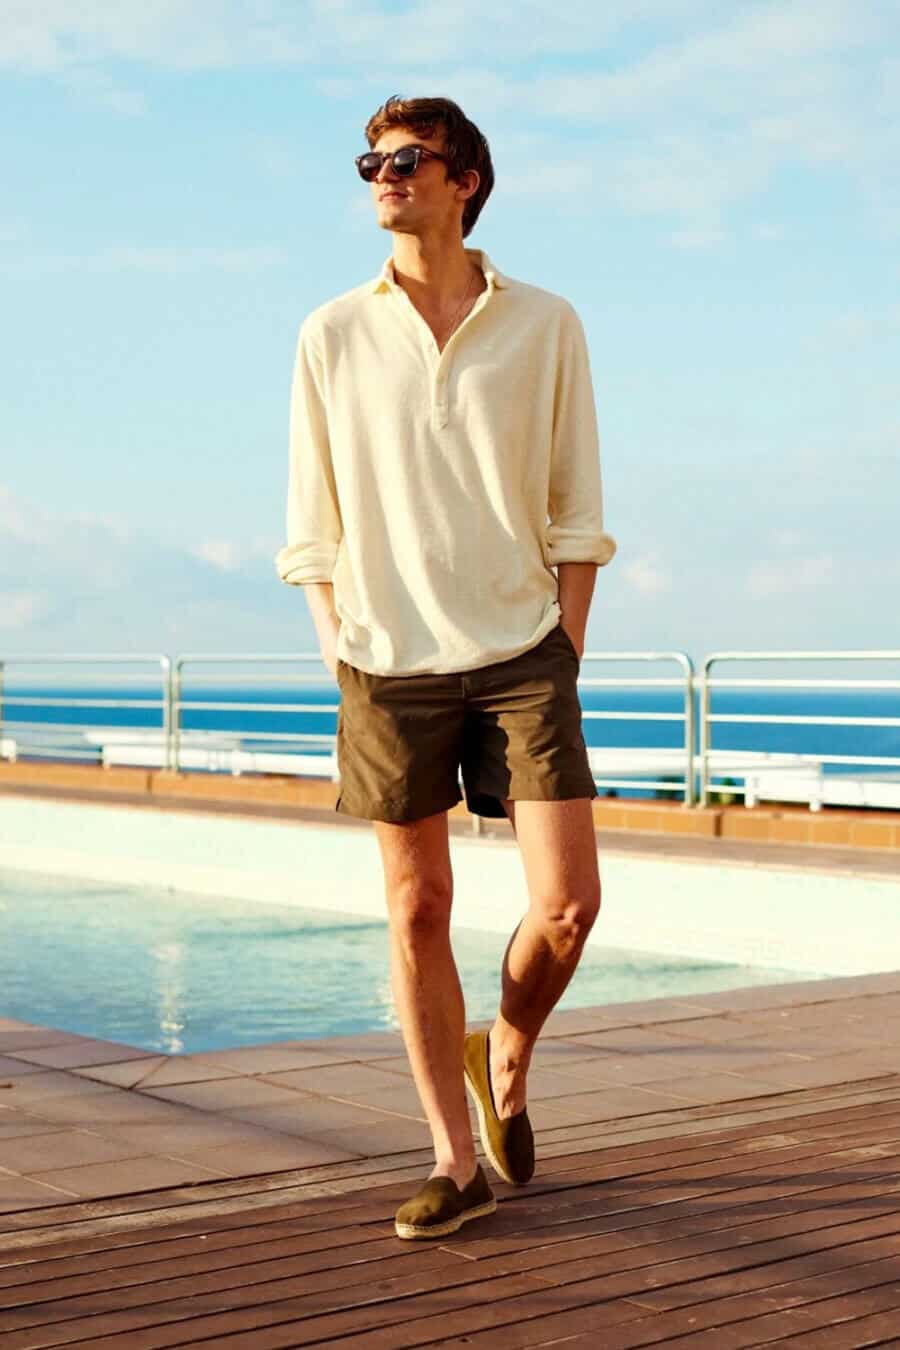 Men's swim shorts with linen shirt and espadrilles vacation outfit